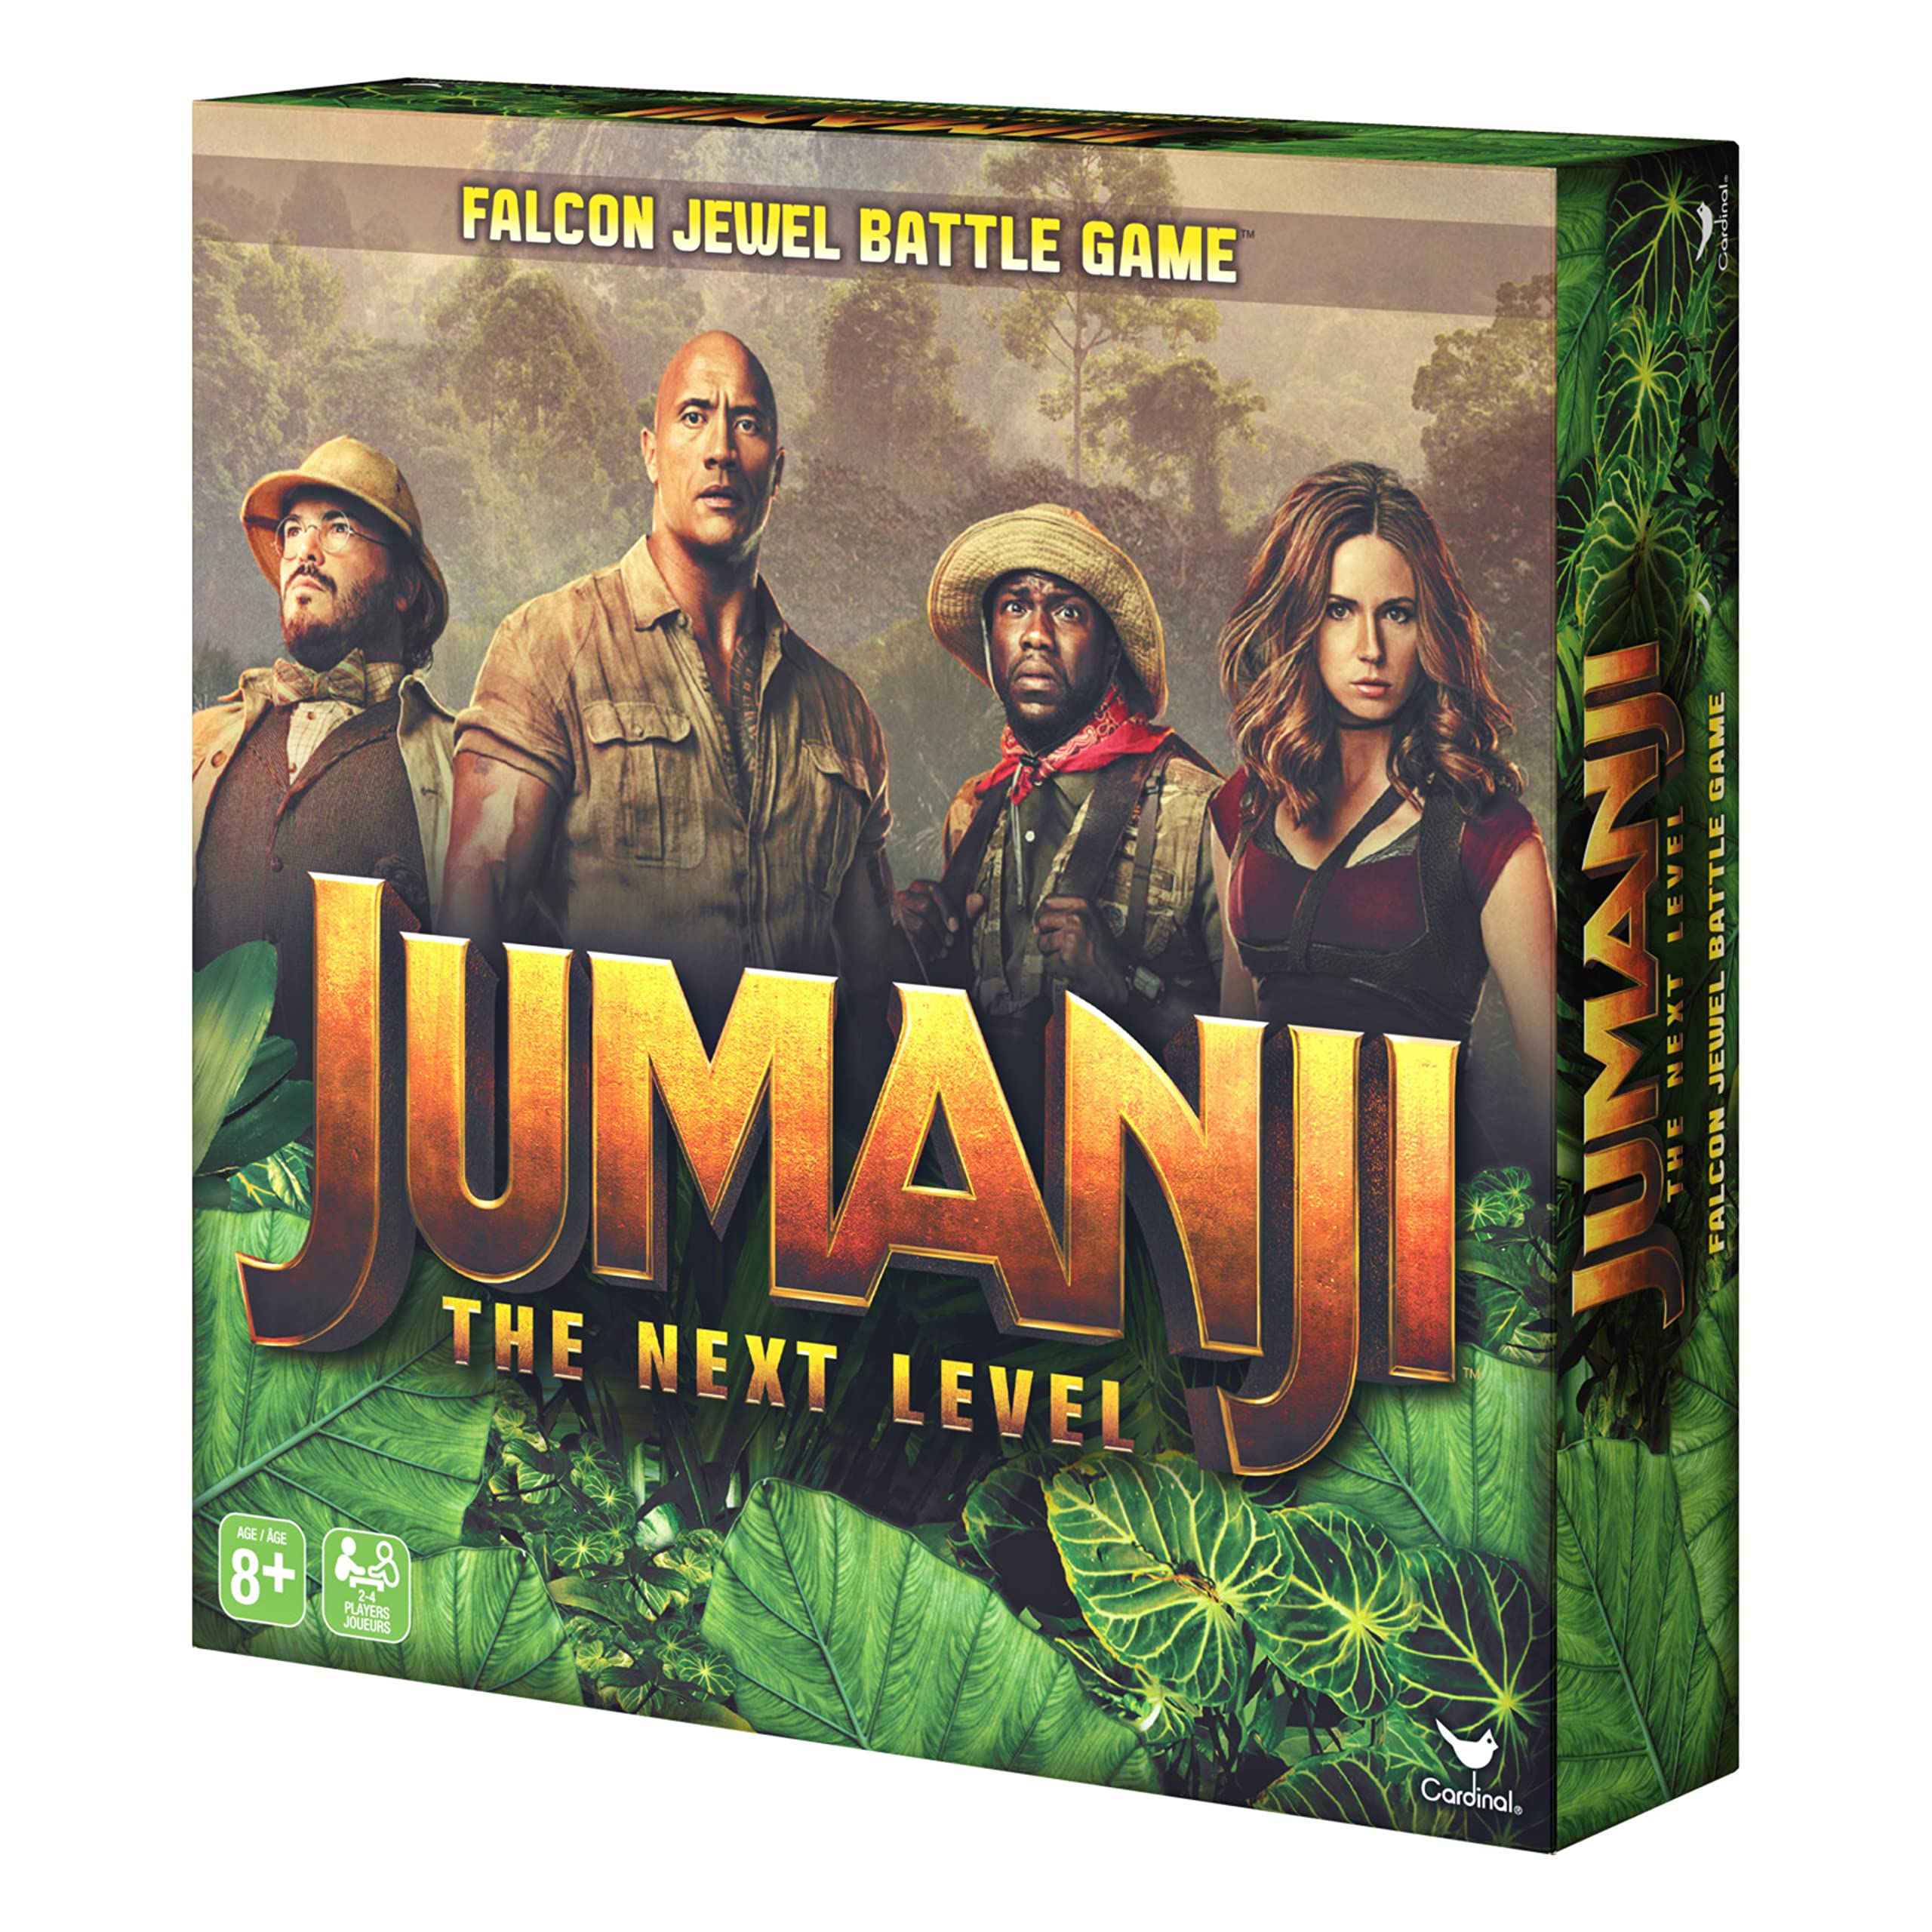 Jumanji 3 The Next Level, Falcon Jewel Battle Board Game for Kids, Families, and Adults